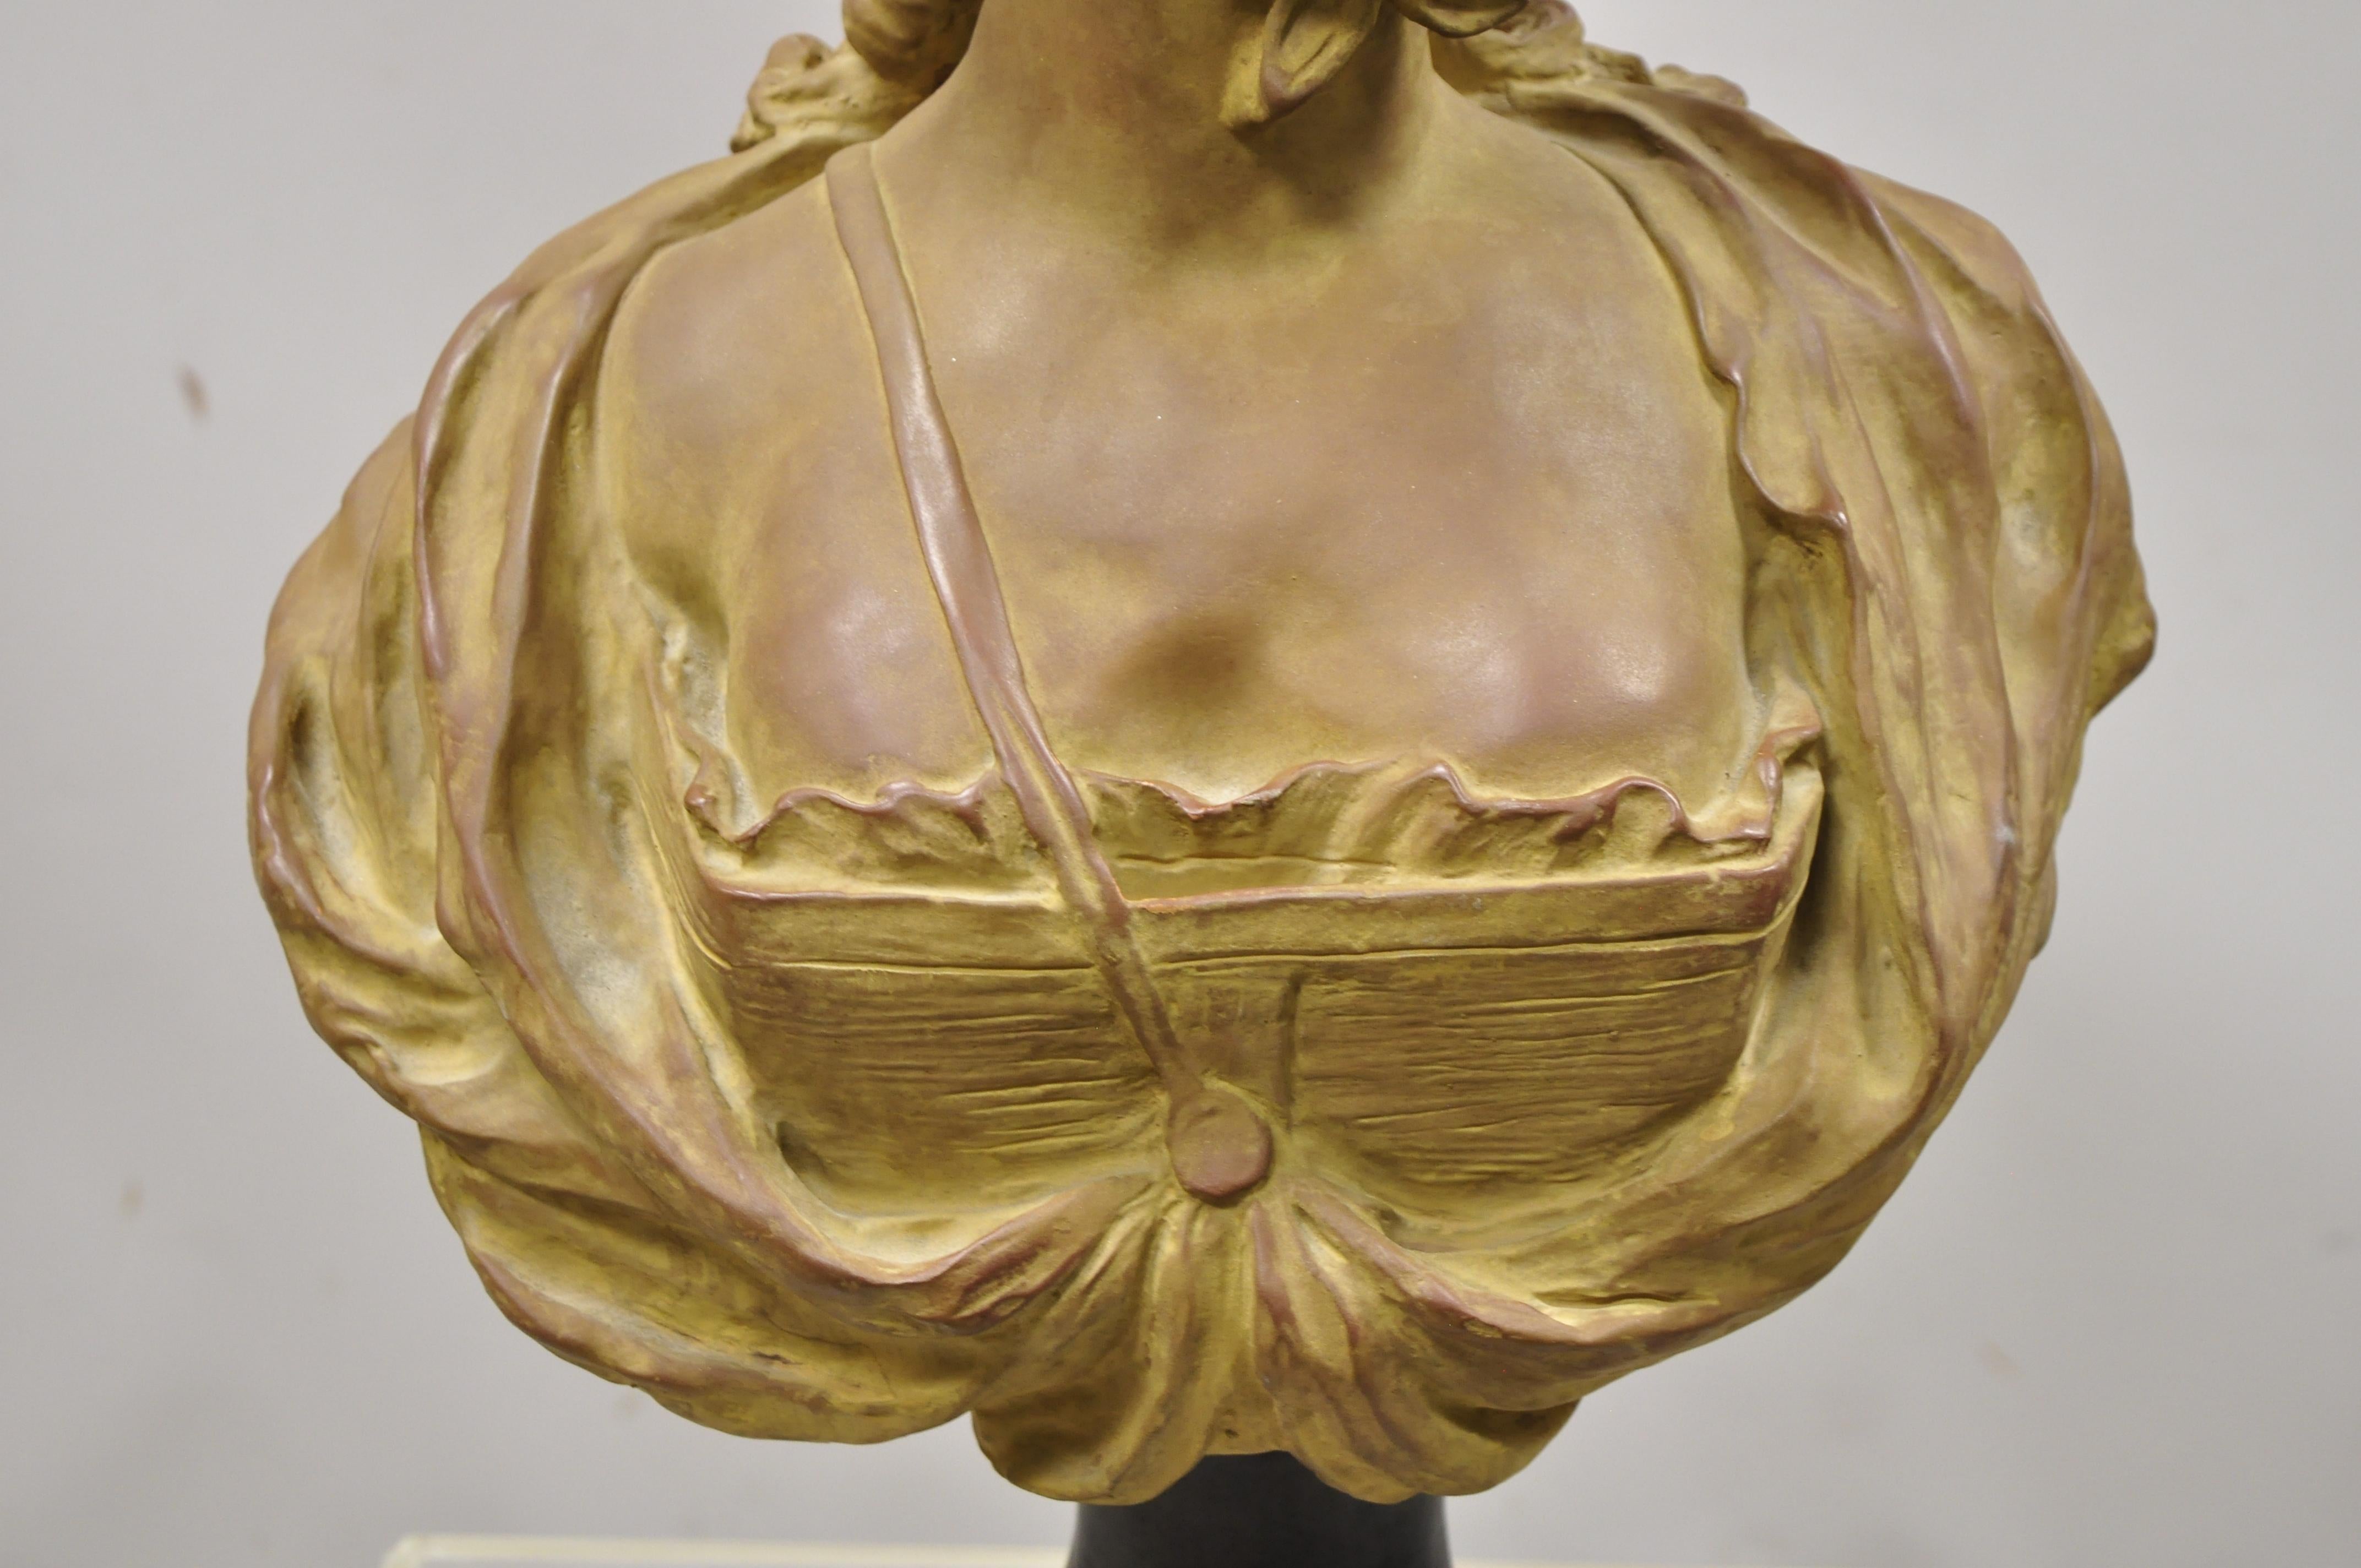 Victorian French Terracotta Bust of Young Woman Sculpture after A. Conord, 1763